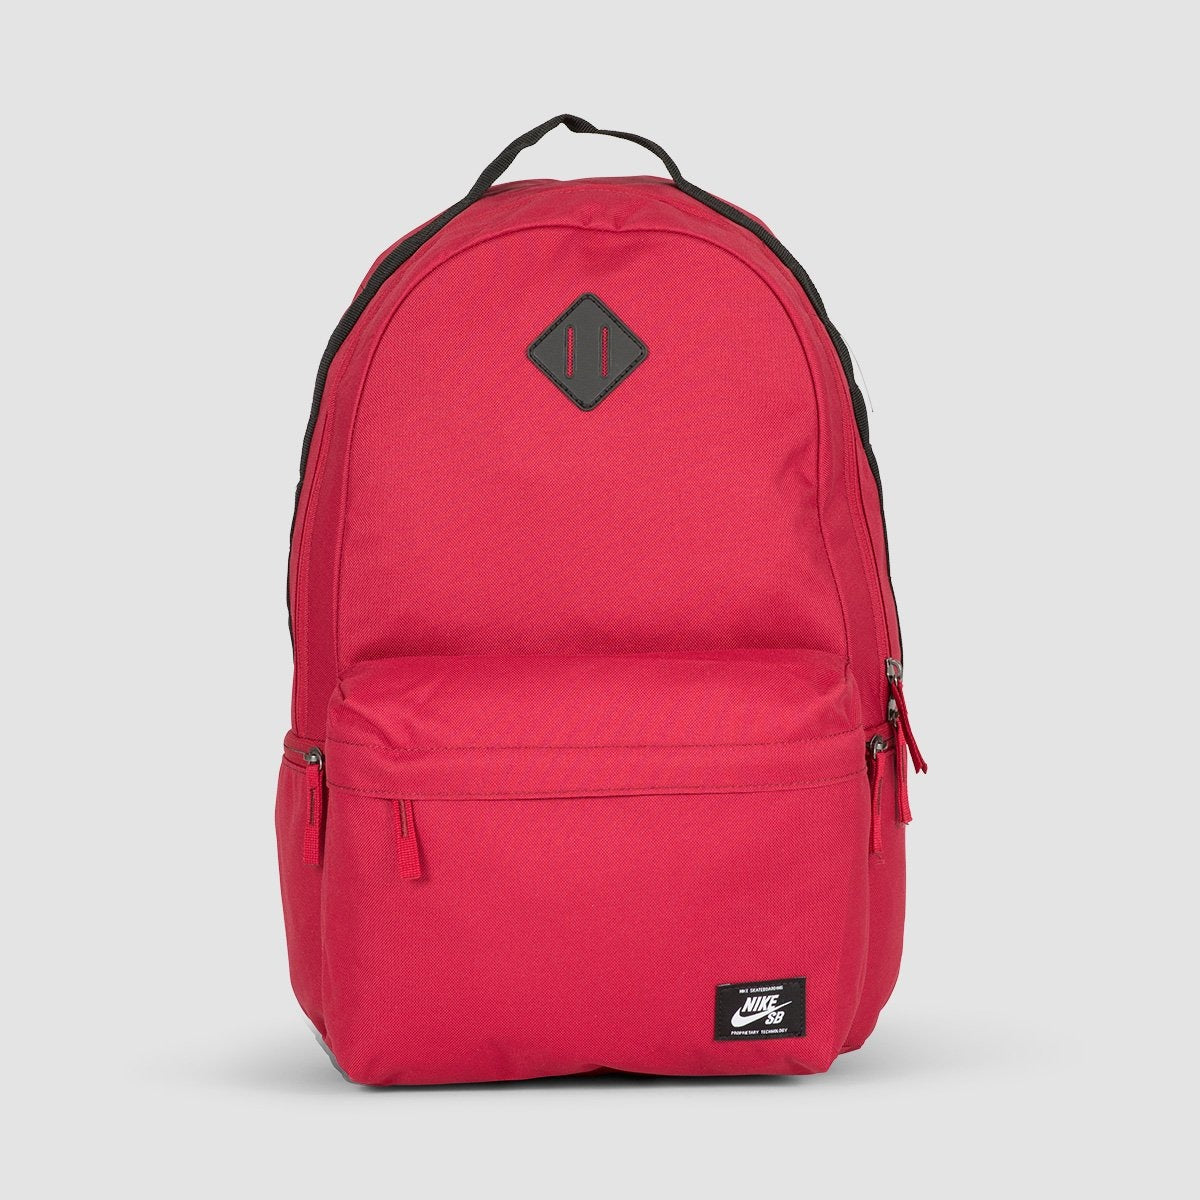 No complicado borroso campana Nike SB Icon 26L Backpack Red Crush/Black/White - rollersnakes.co.uk –  Rollersnakes